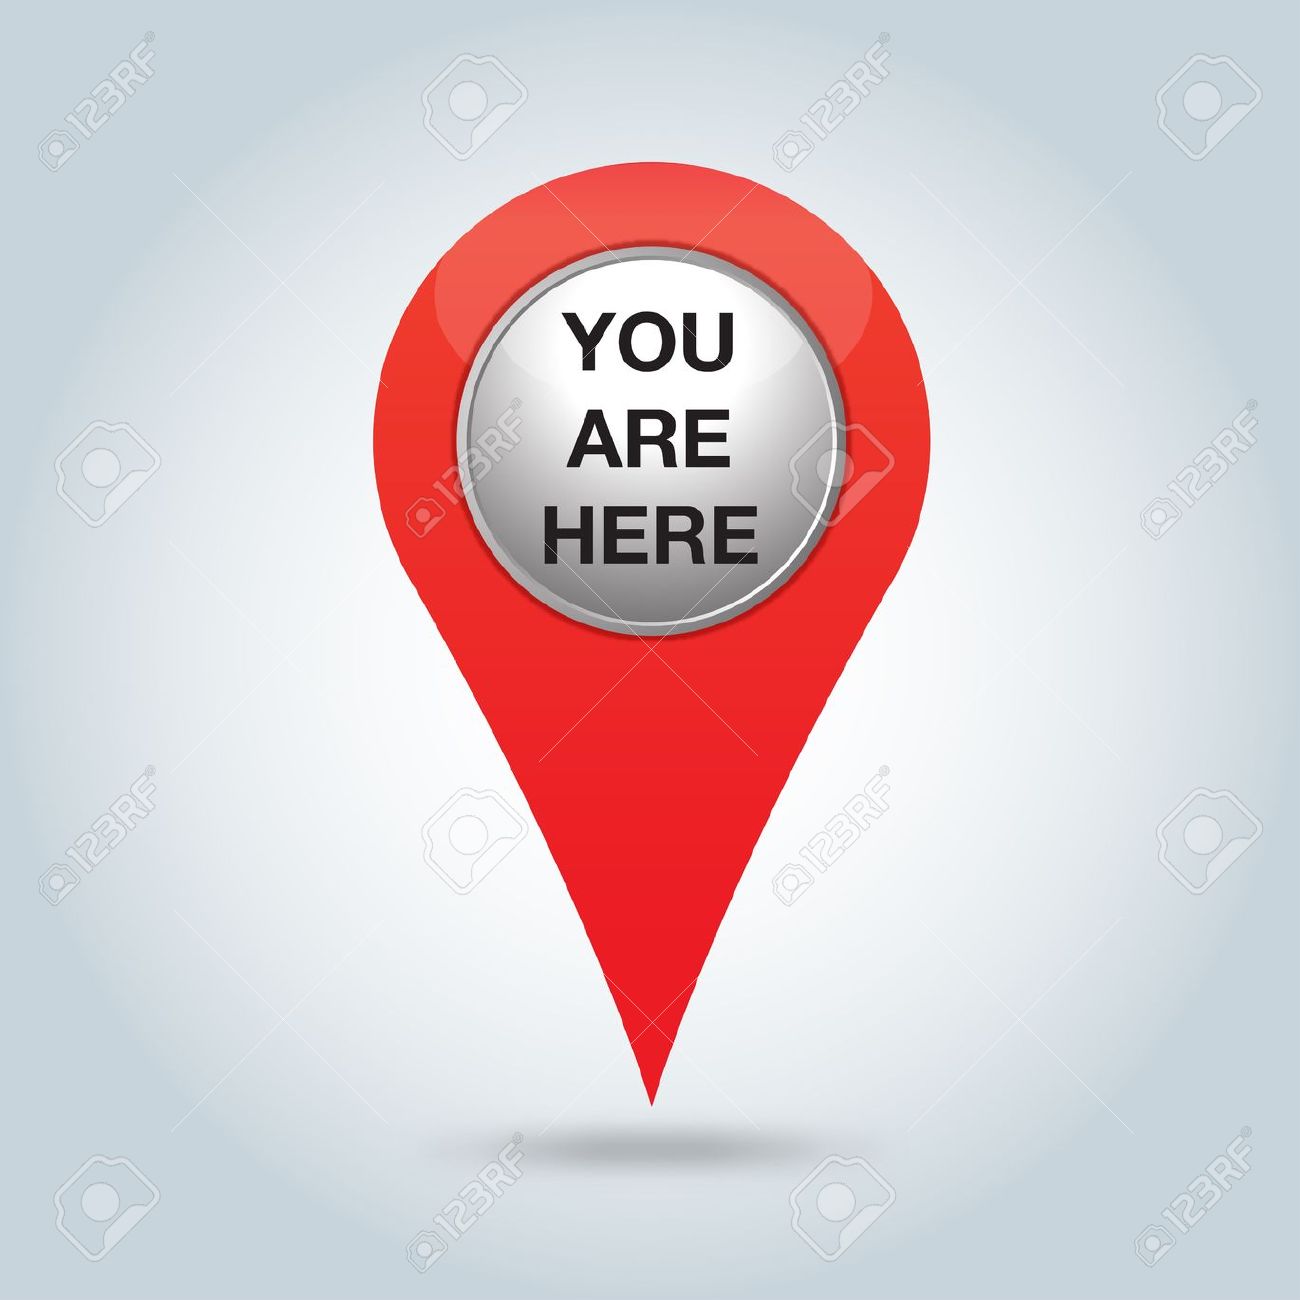 clipart you are here - photo #13